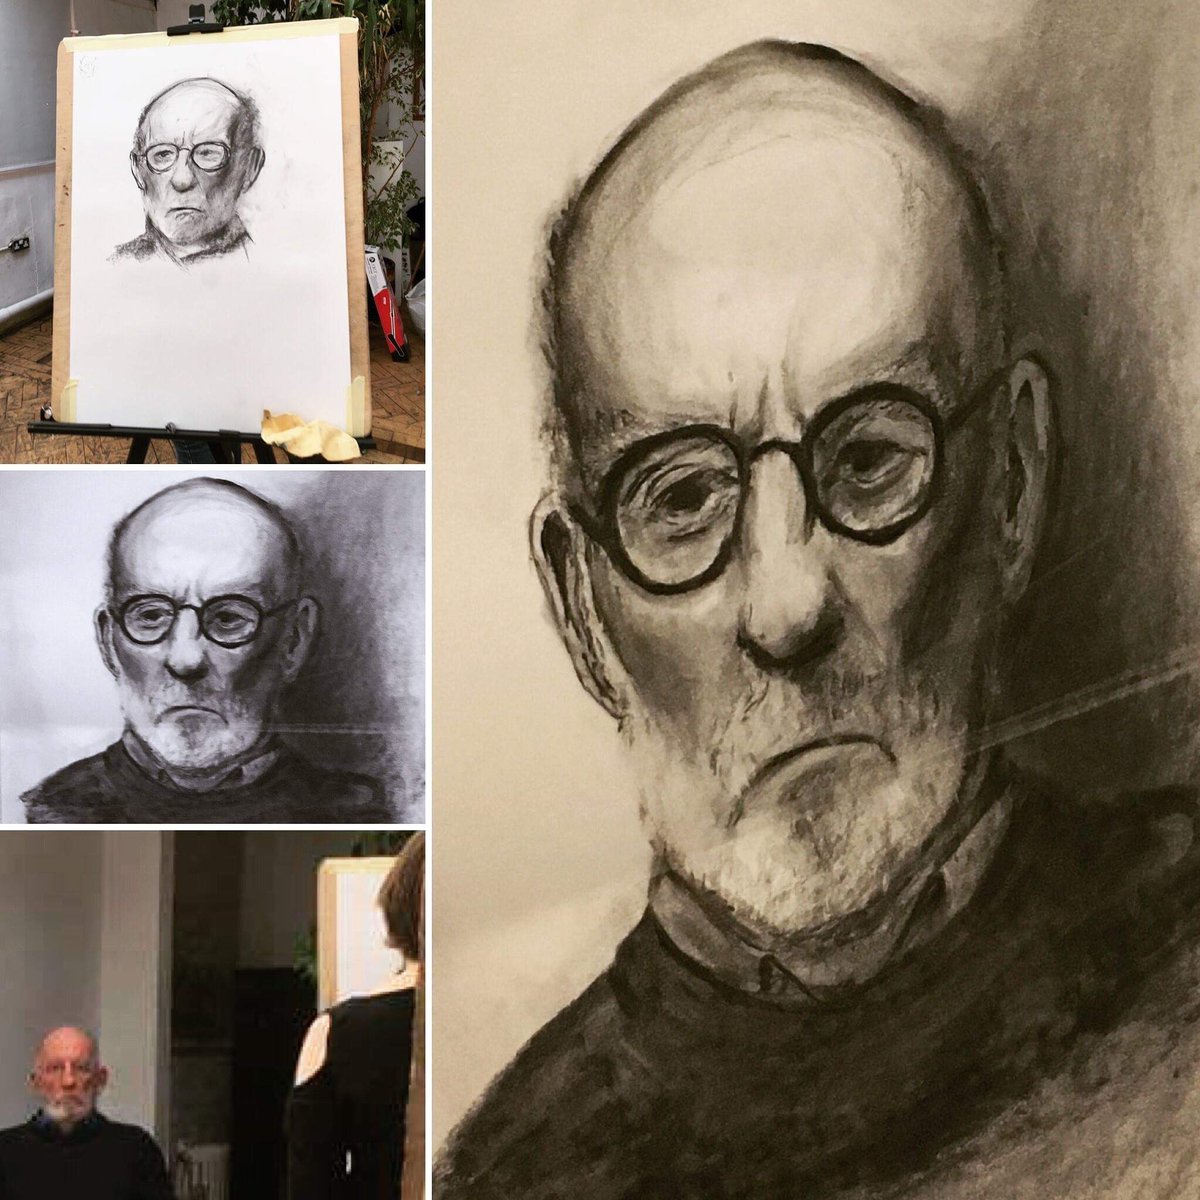 This was my first ever charcoal drawing.The difference between the top-left and final image was simply that I used the technique of standing back to see both subject and canvas side-by-side.Which I knew from the theory of “sight-size” (best accuracy technique).